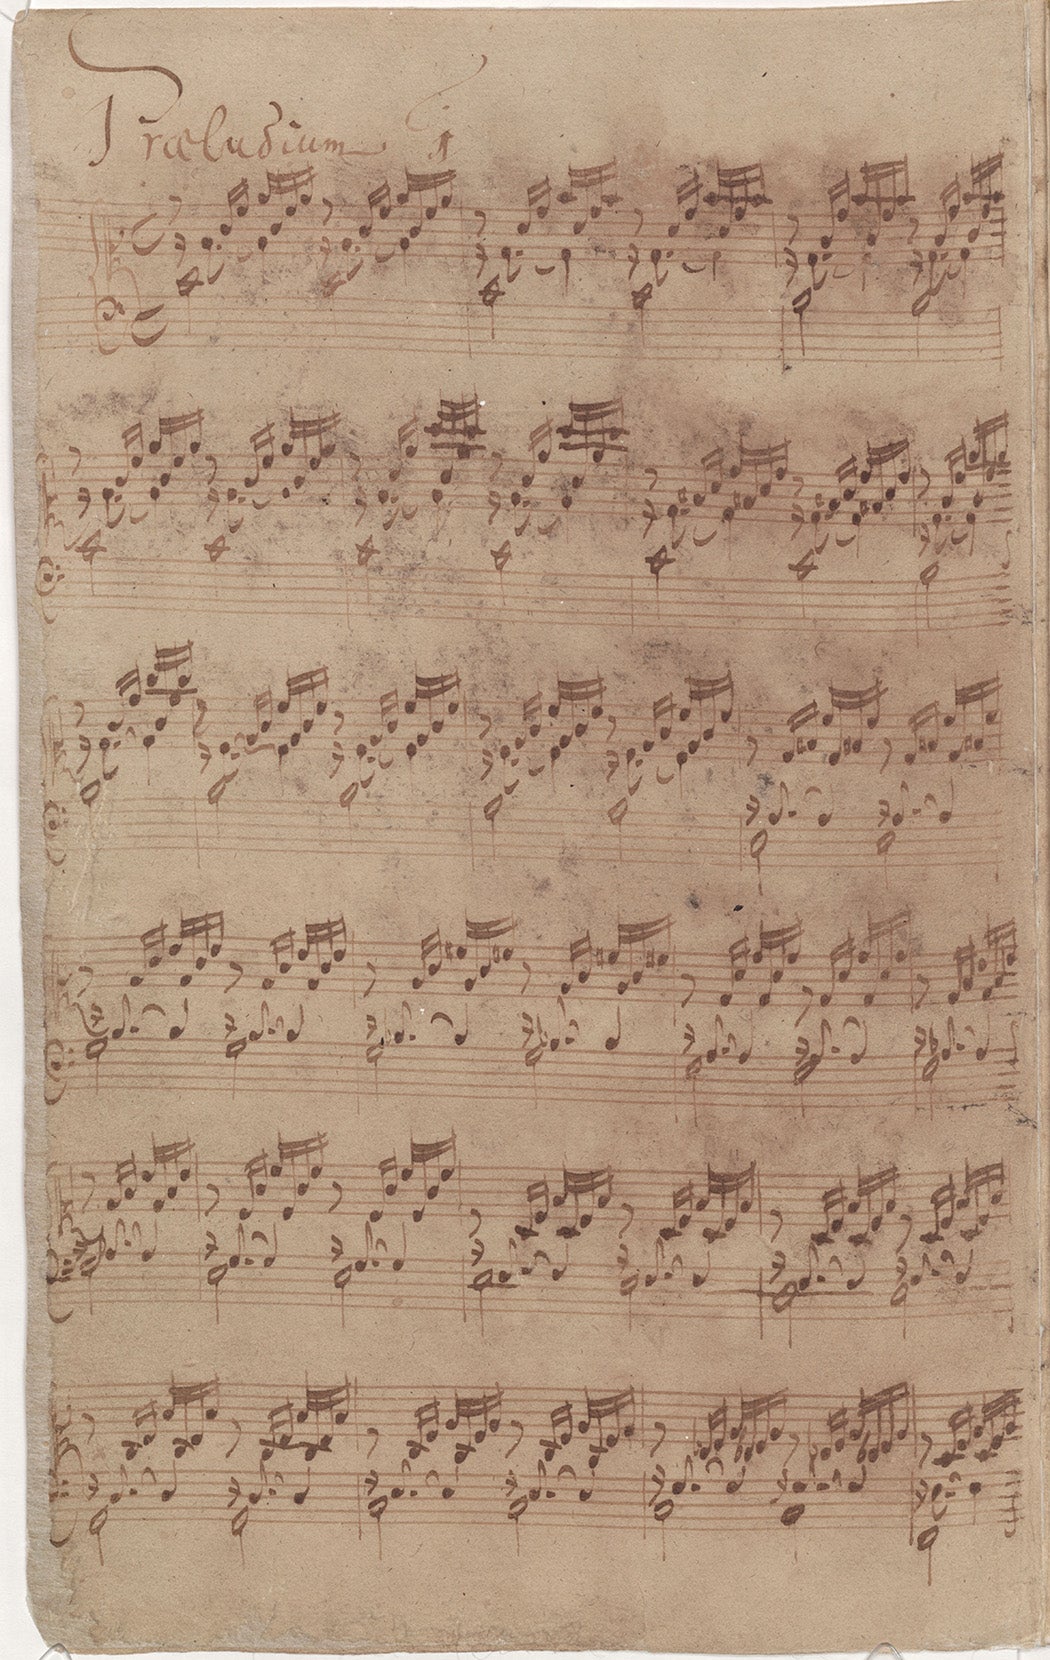 Autograph manuscript of title page of Book I of the Well-Tempered Clavier, 1722